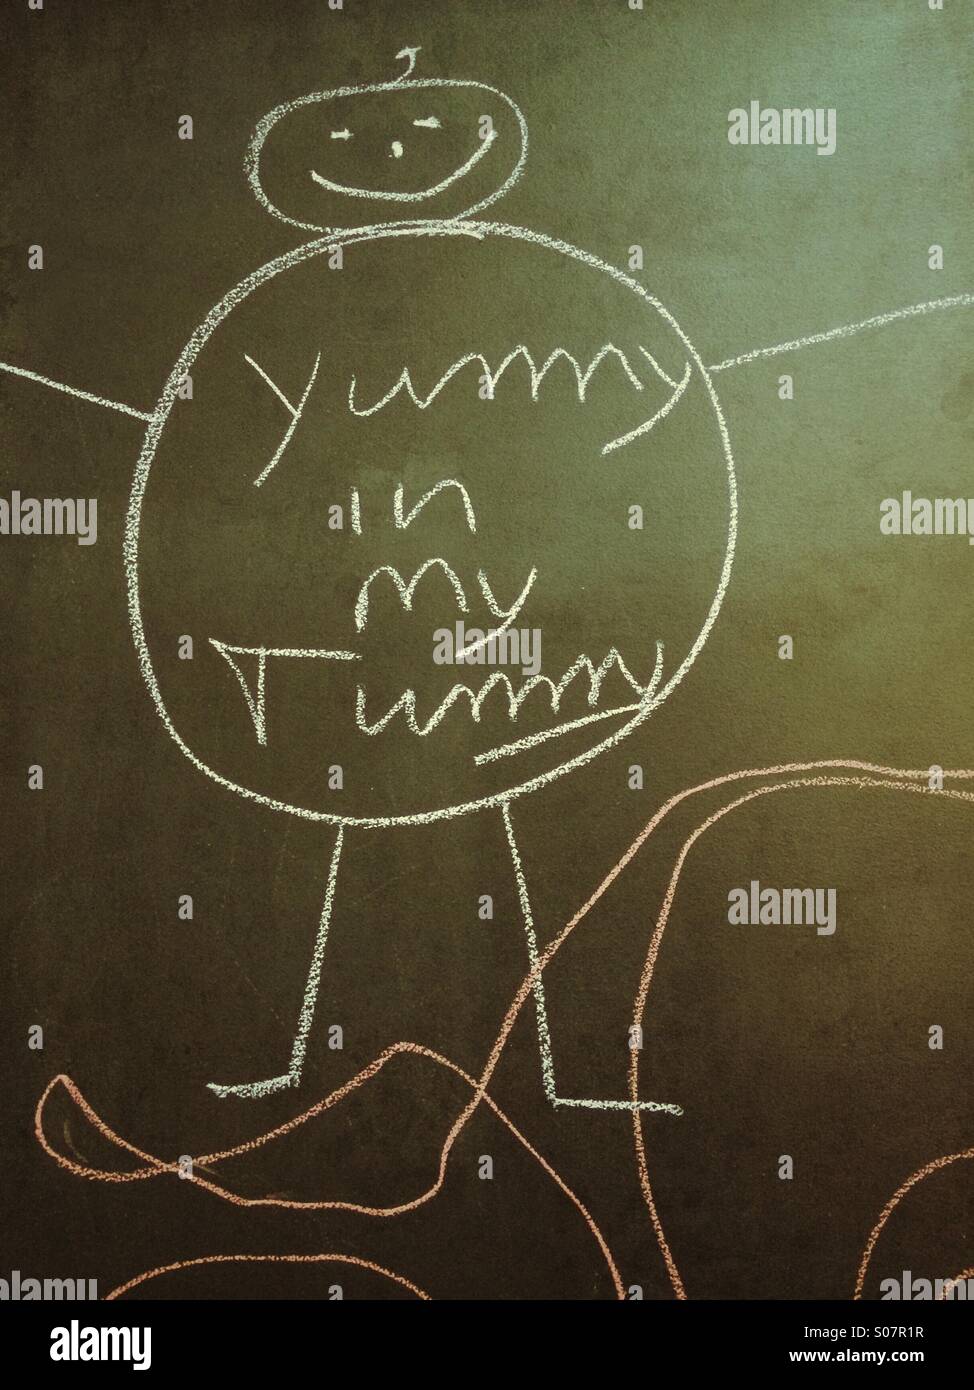 Chalk drawing reads 'yummy in my tummy'. Stock Photo